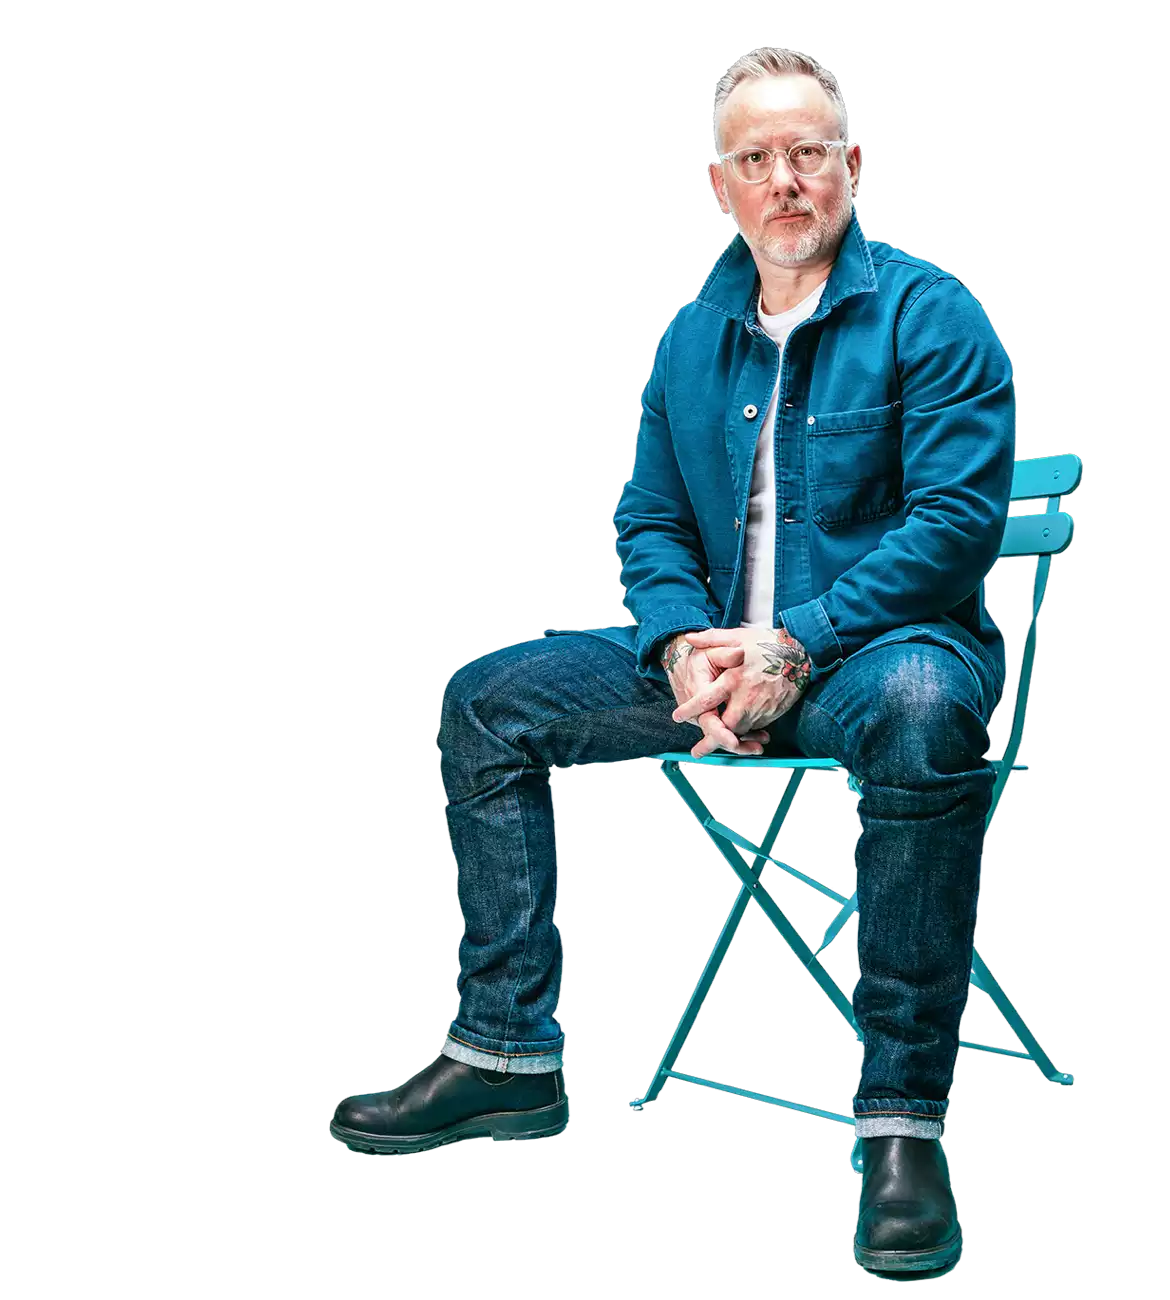 a man with glasses sitting down on a blue chair, wearing a jeans and jean jacket, and looking straightahead